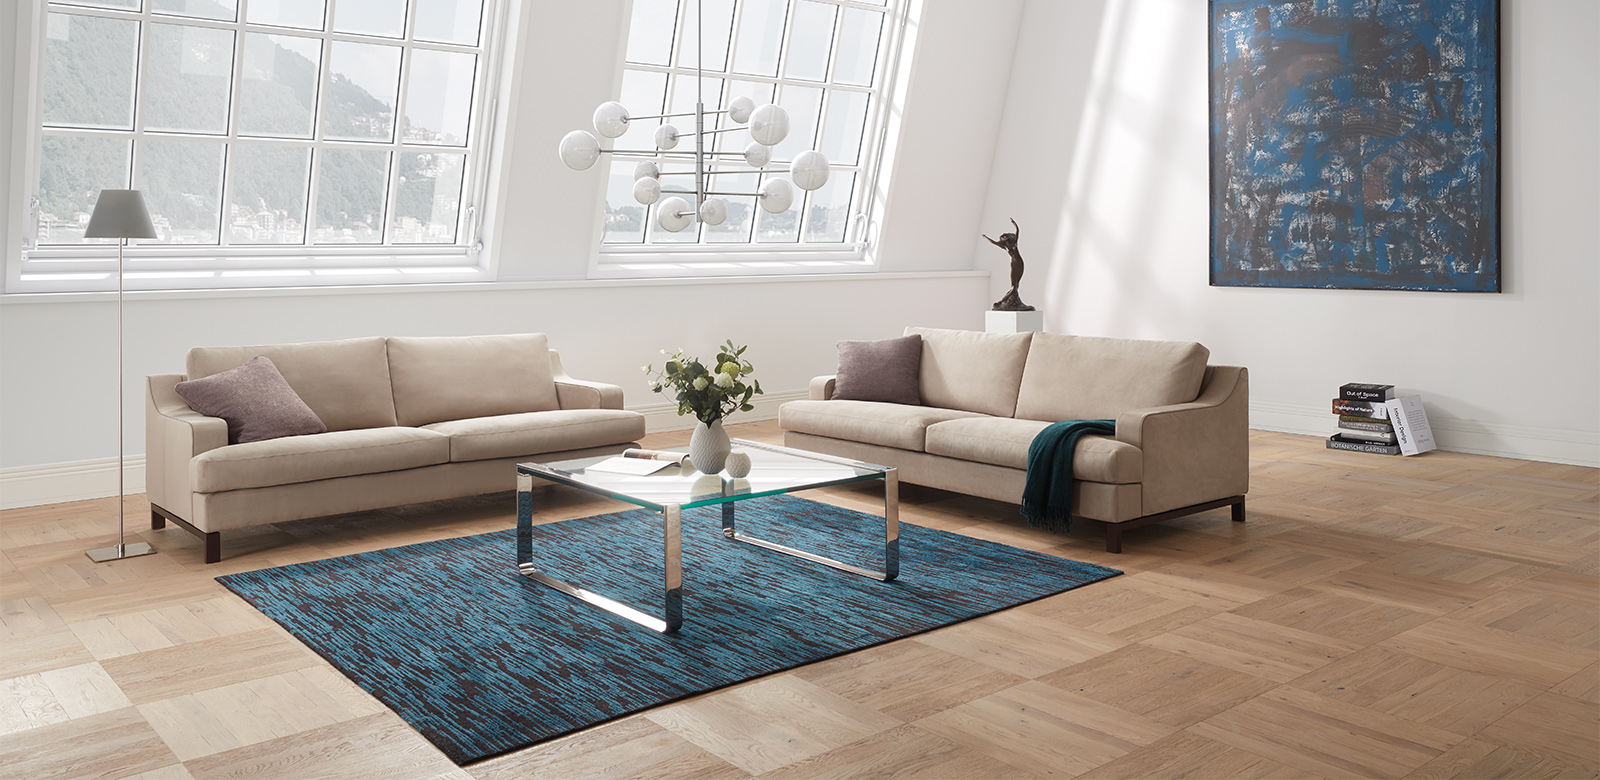 CL770 Sofas in beige leather with glass table on blue carpet in spacious living room of an industrial loft